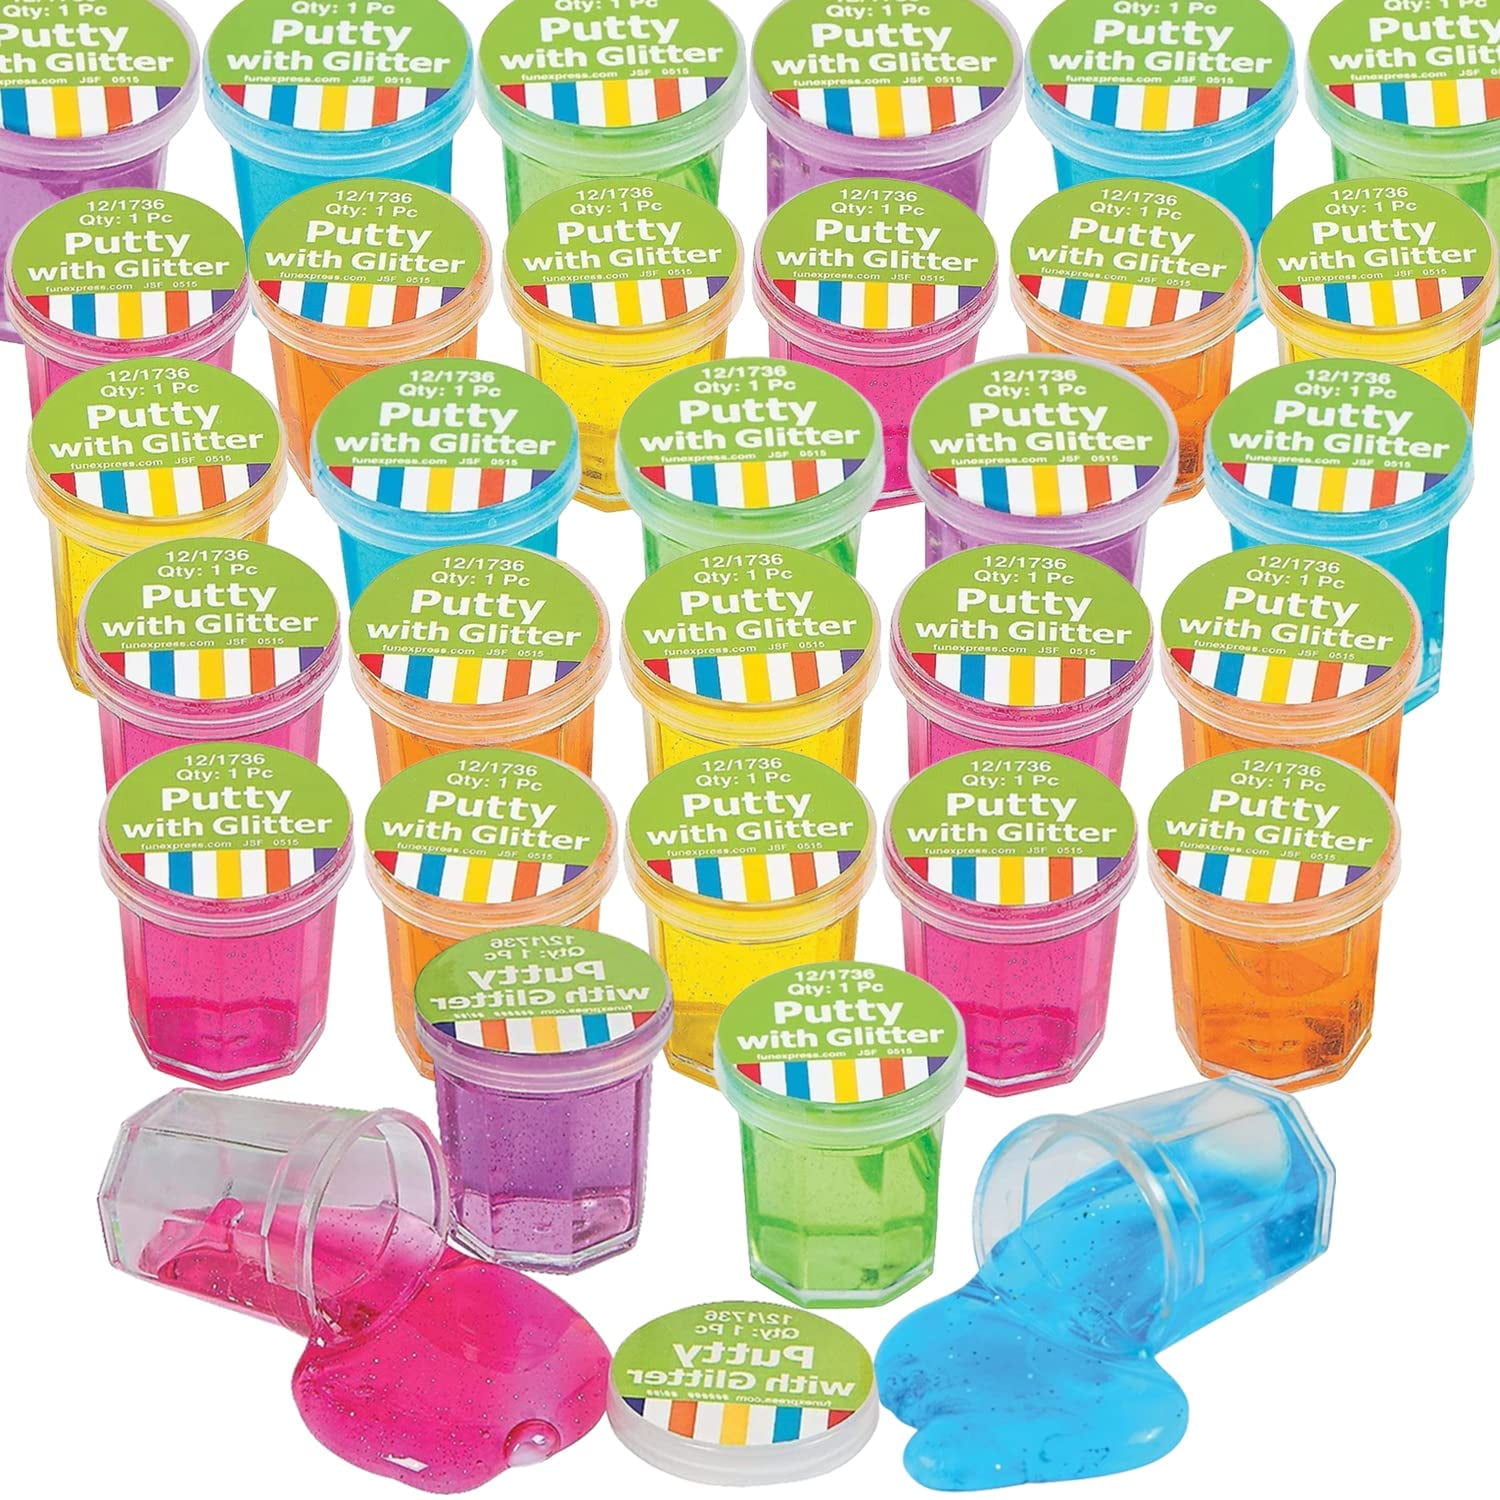 48 PC Bulk Water Bead Squeeze Toy Handout Kit